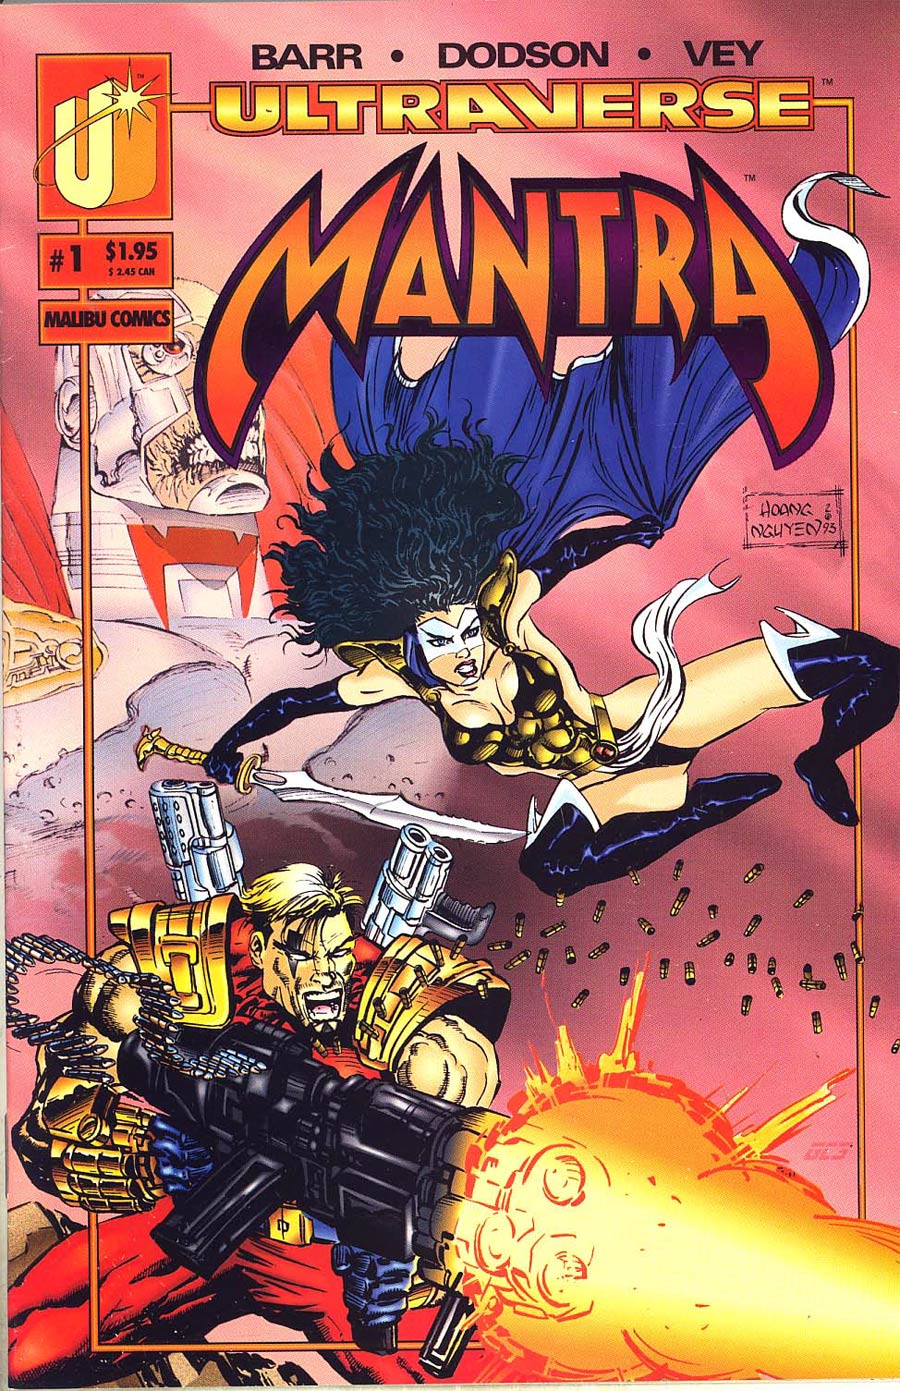 Mantra #1 Cover B Collectors Edition Without Polybag